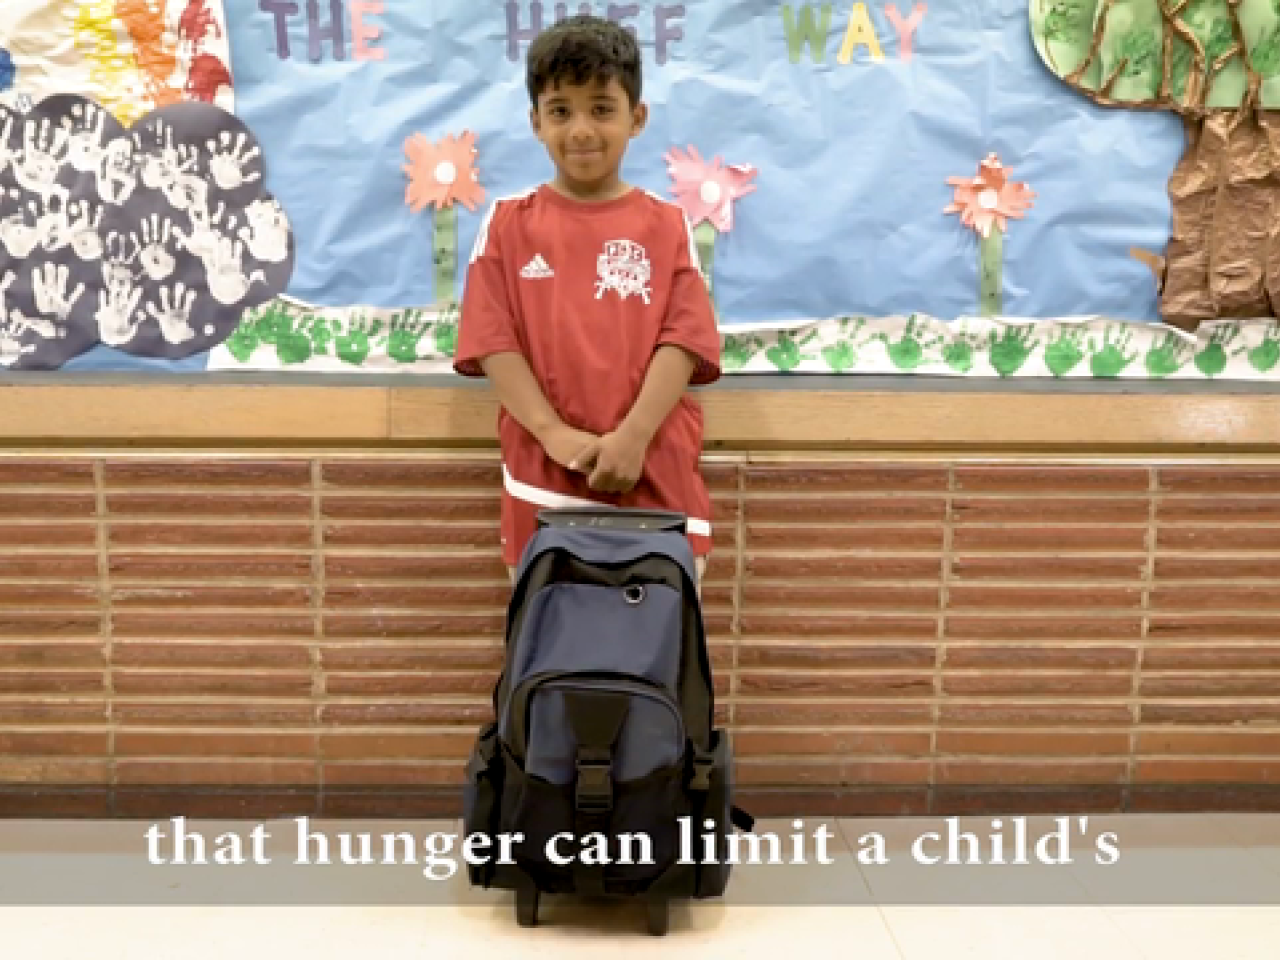 That hunger can limit a child.